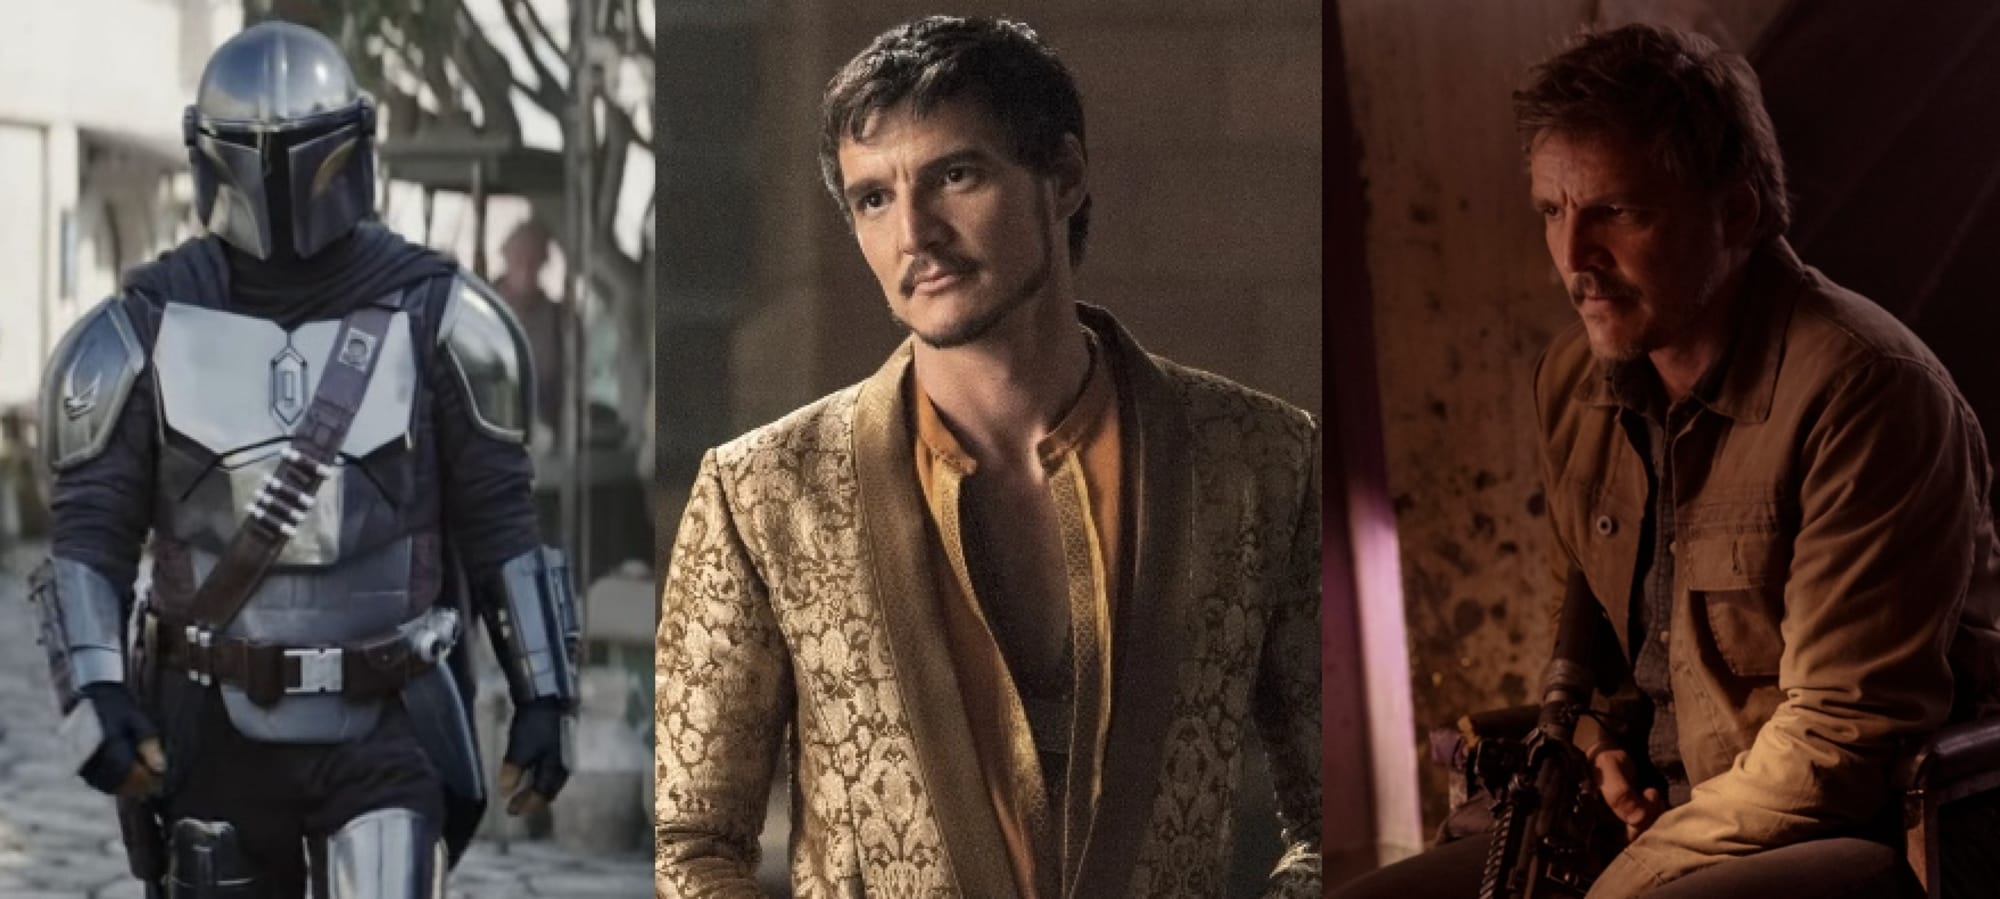 The Last Of Us star Pedro Pascal is the perfect sci-fi hero